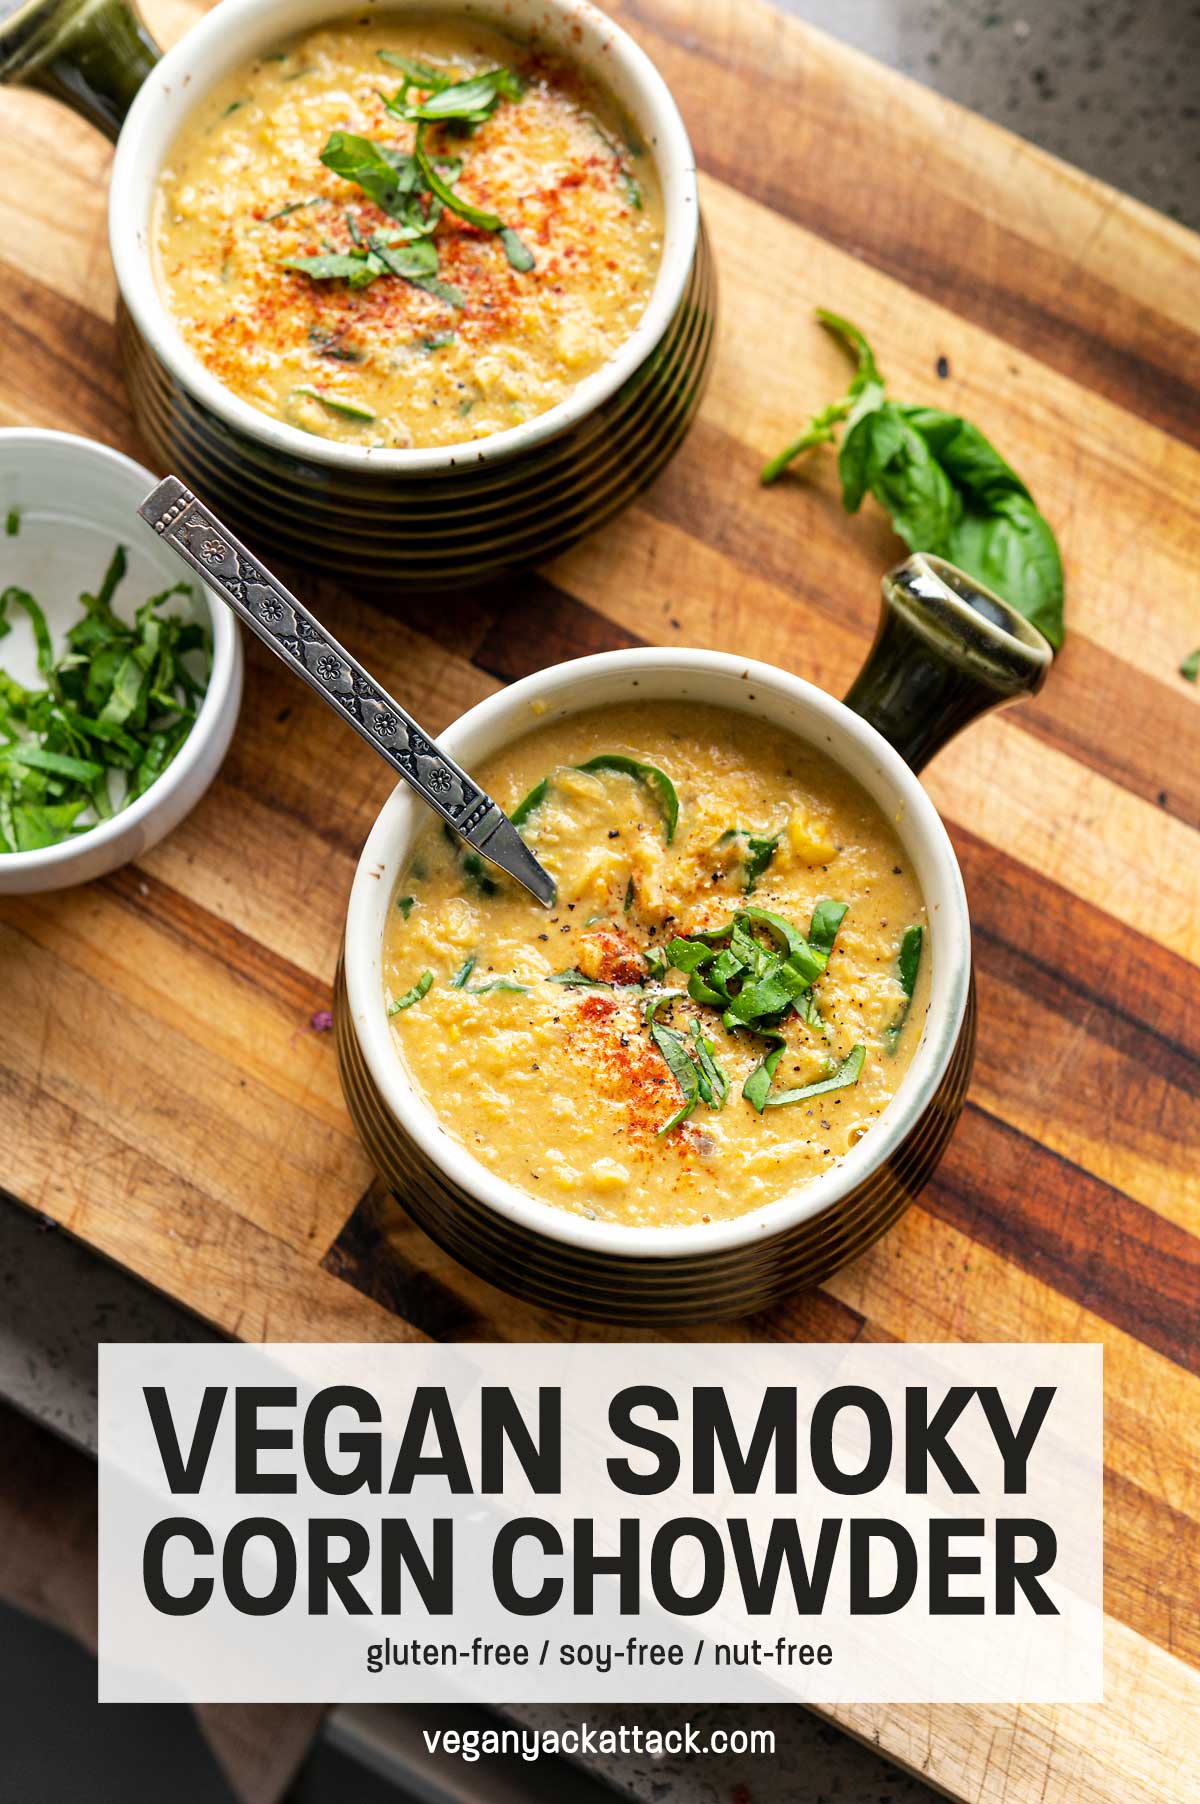 Bowl of corn chowder topped with basil on a cutting board with text overlay "vegan smoky corn chowder"